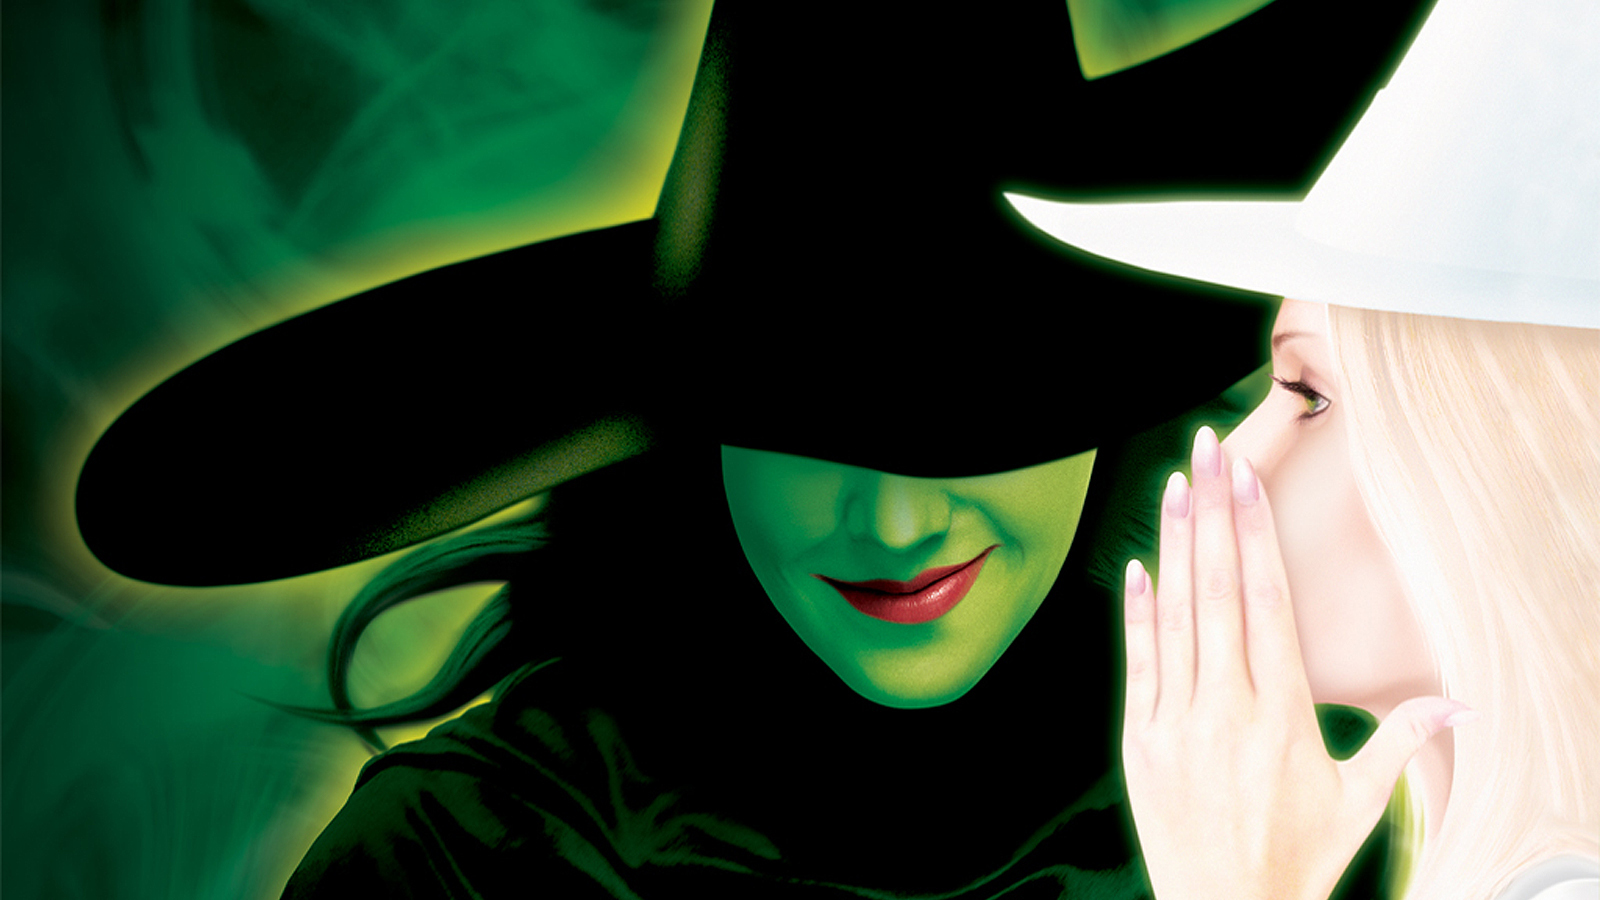  Wallpapers on Wicked The Musical Hd Wallpaper   General   384021